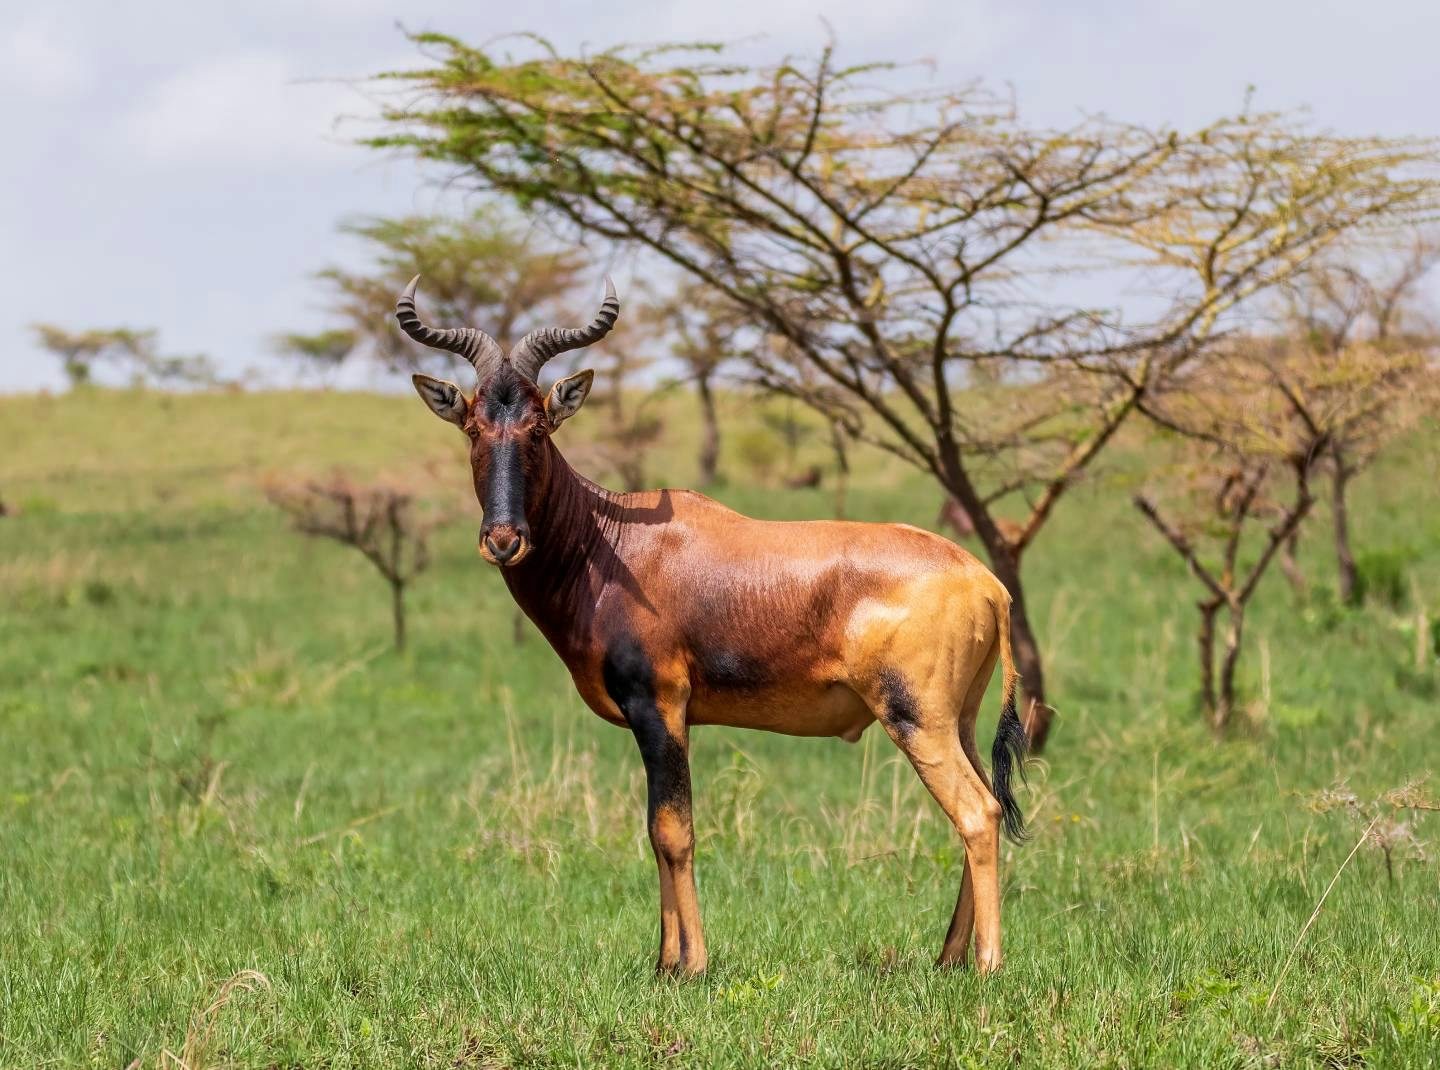 Swayne's hartebeest: how a community is working to save a rare antelope